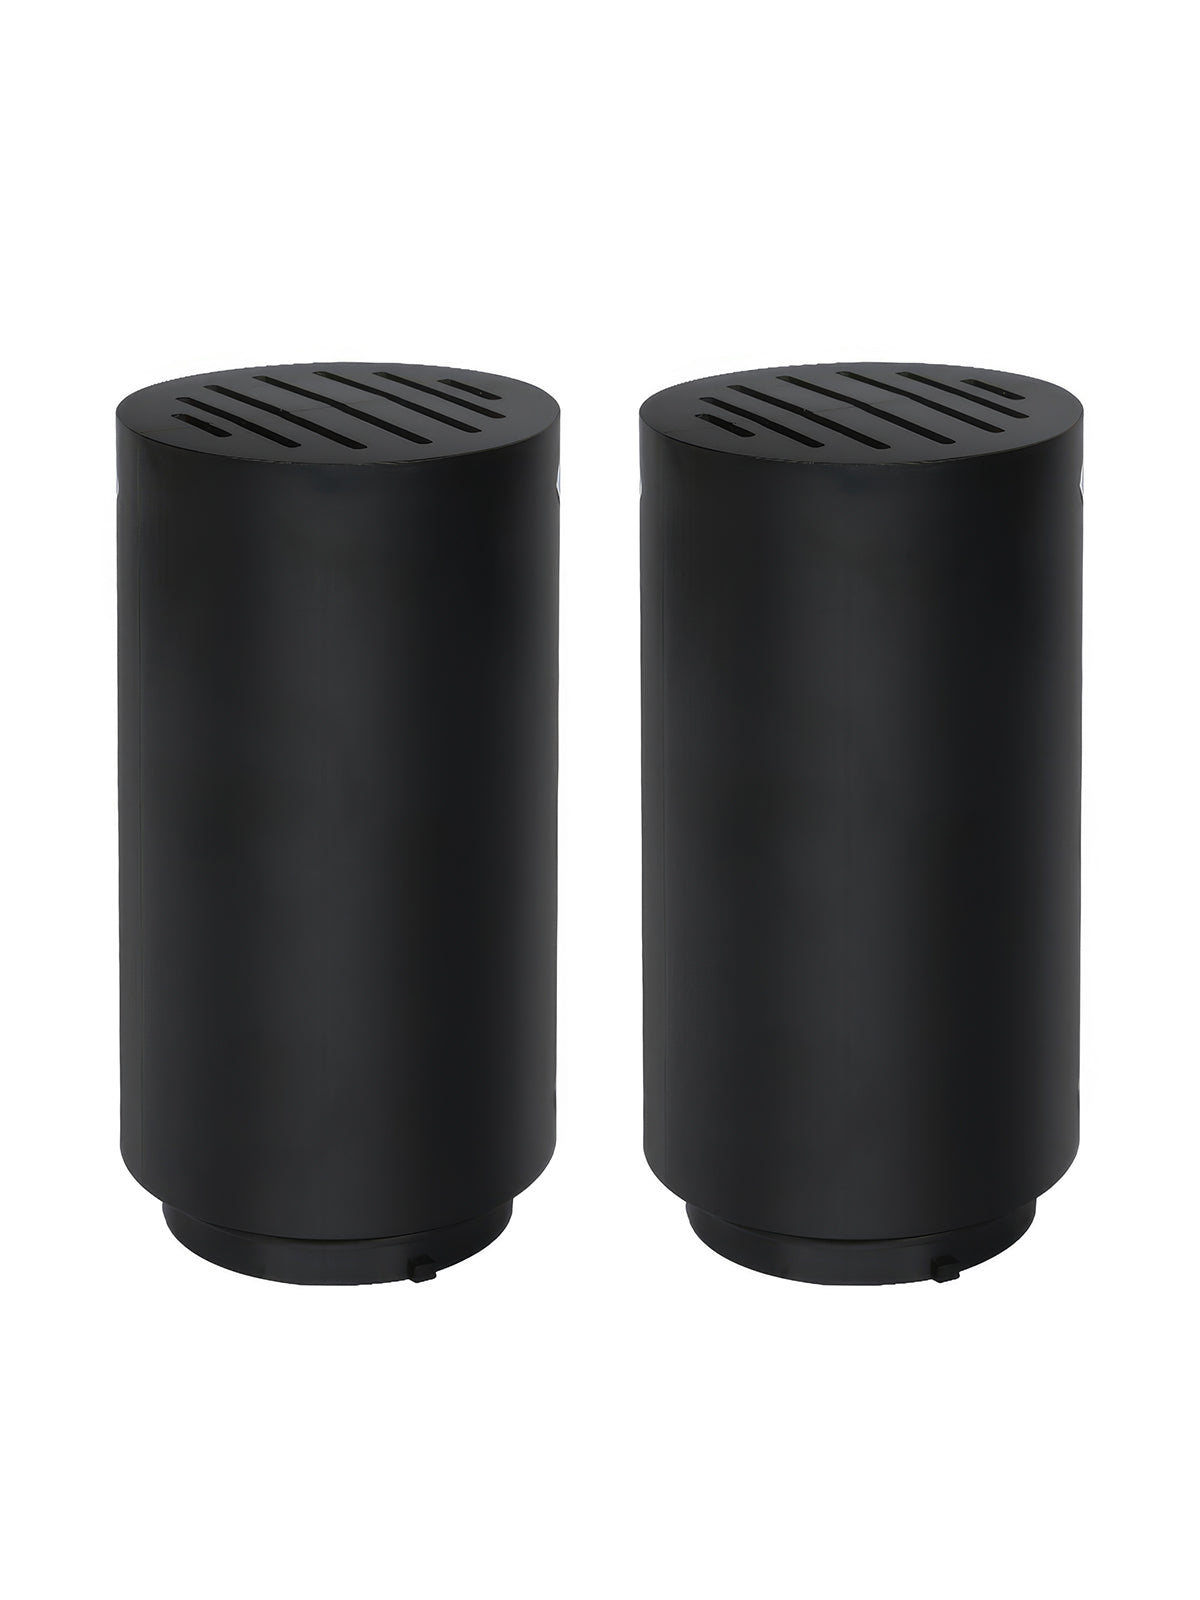 NA-1 Activated Carbon Filter